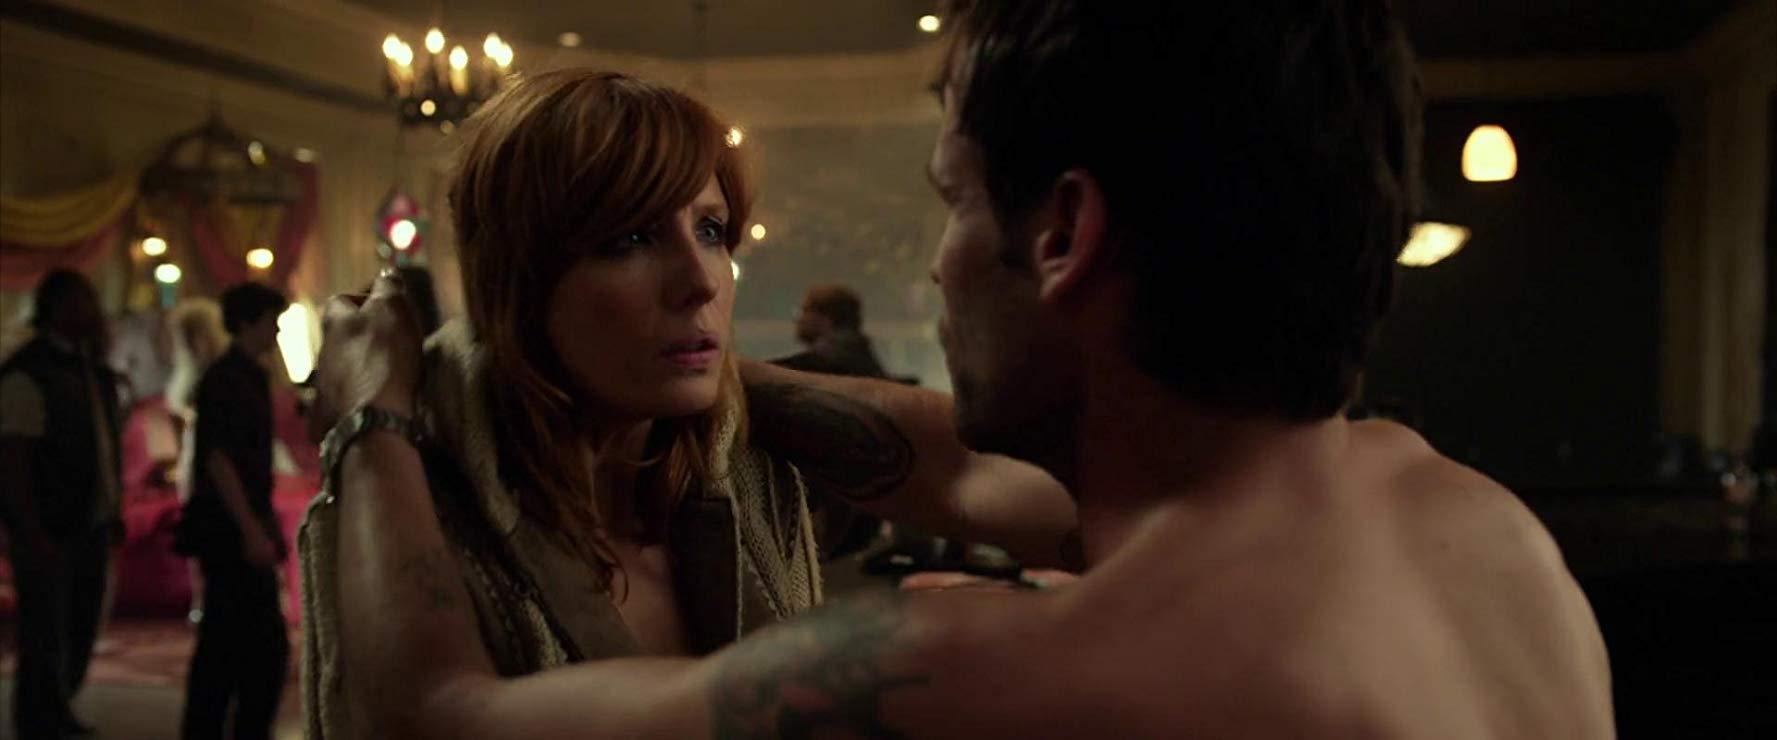 “#HappyBirthday to Kelly Reilly (42)
her top 10 movies are:
...